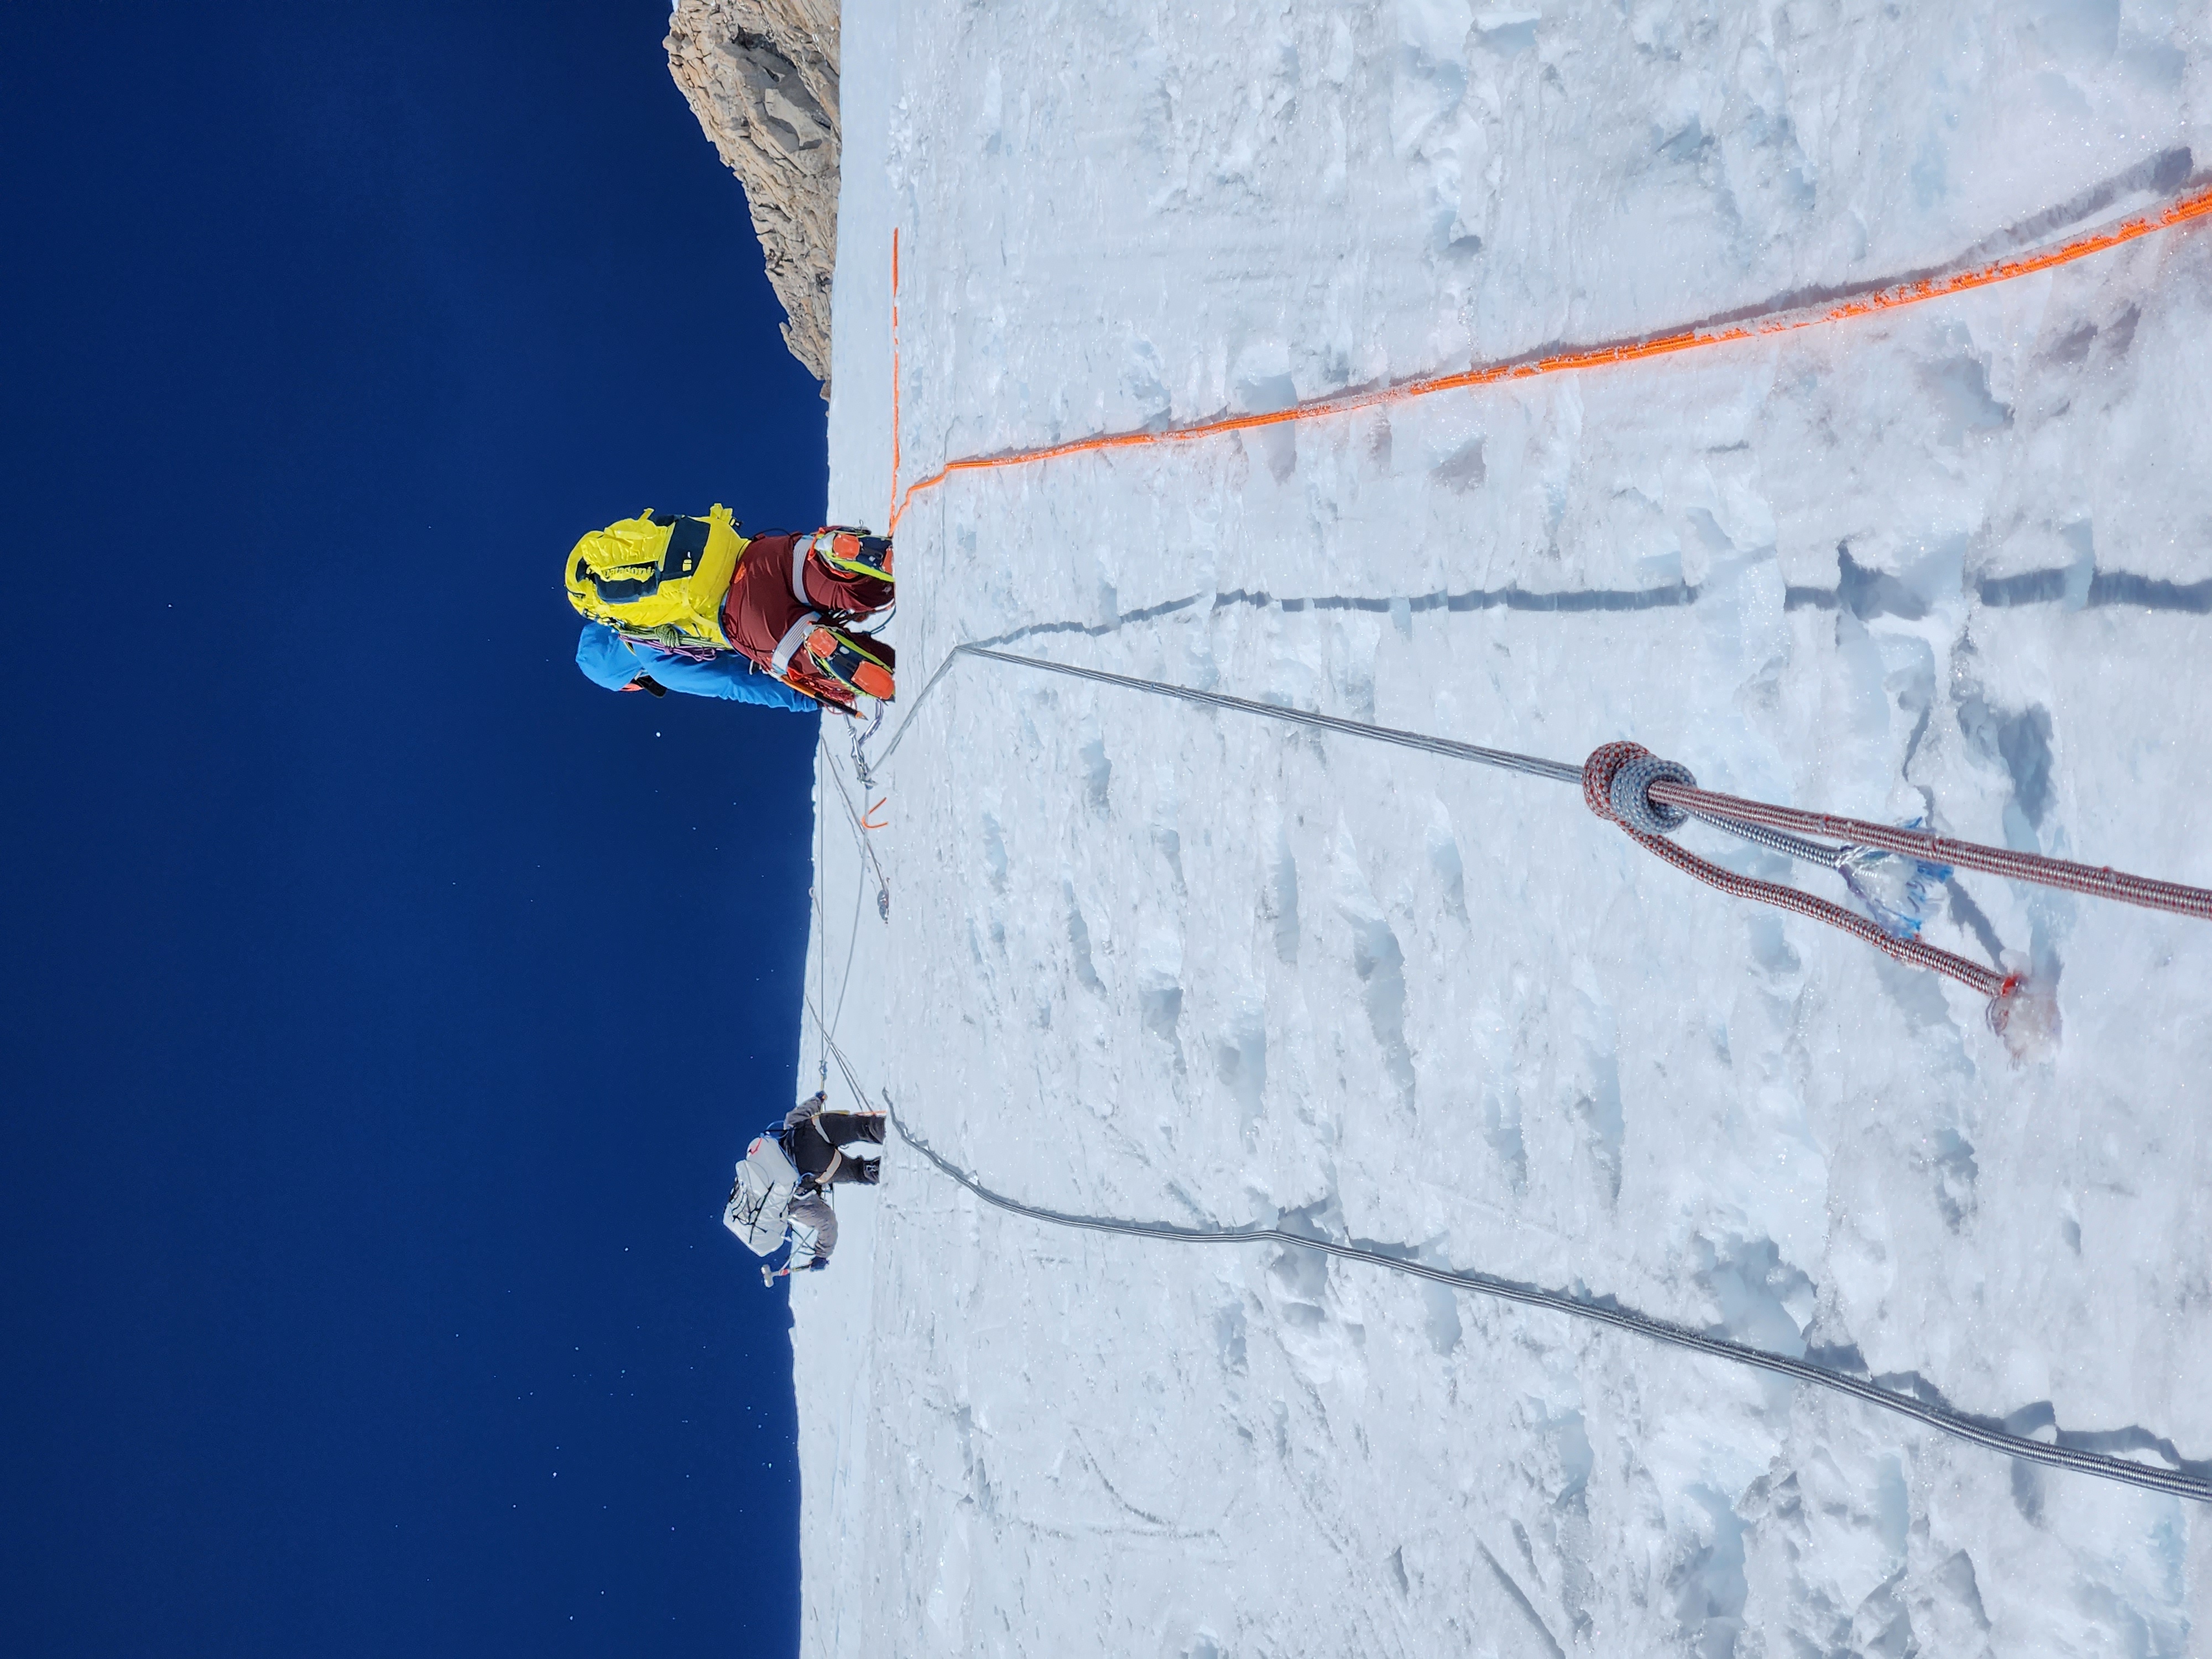 A view from below of two climbers ascending a roped slope.